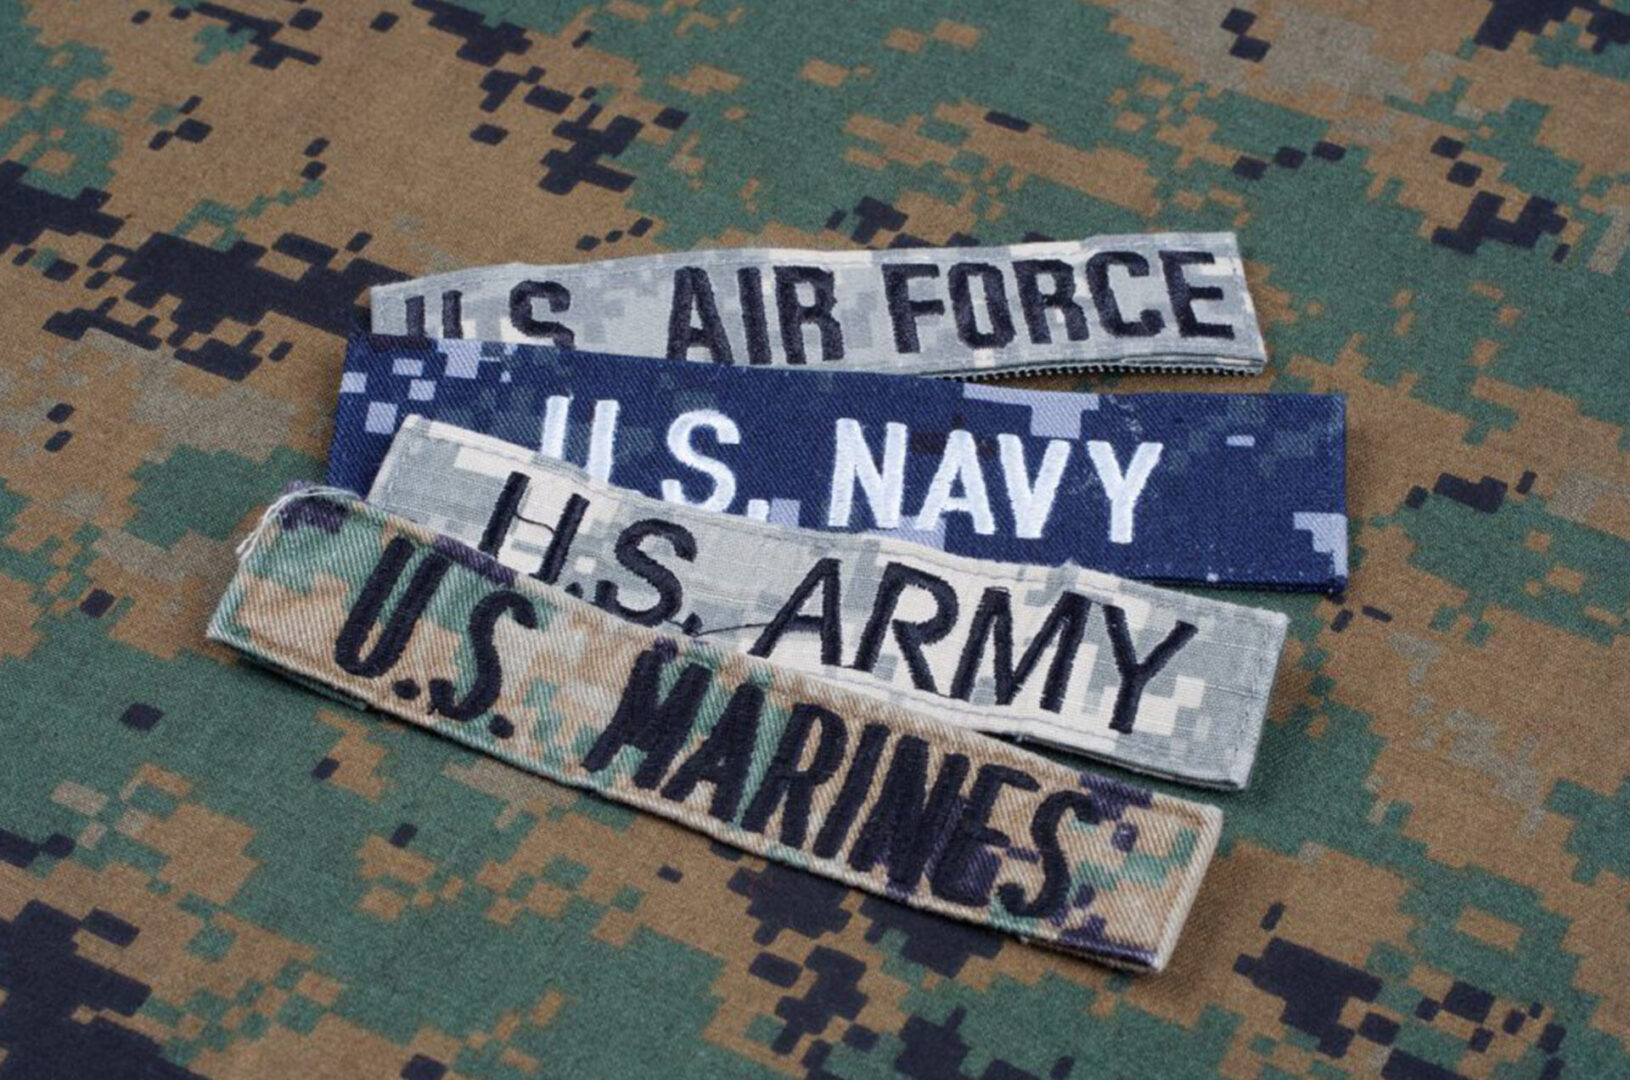 Military labels